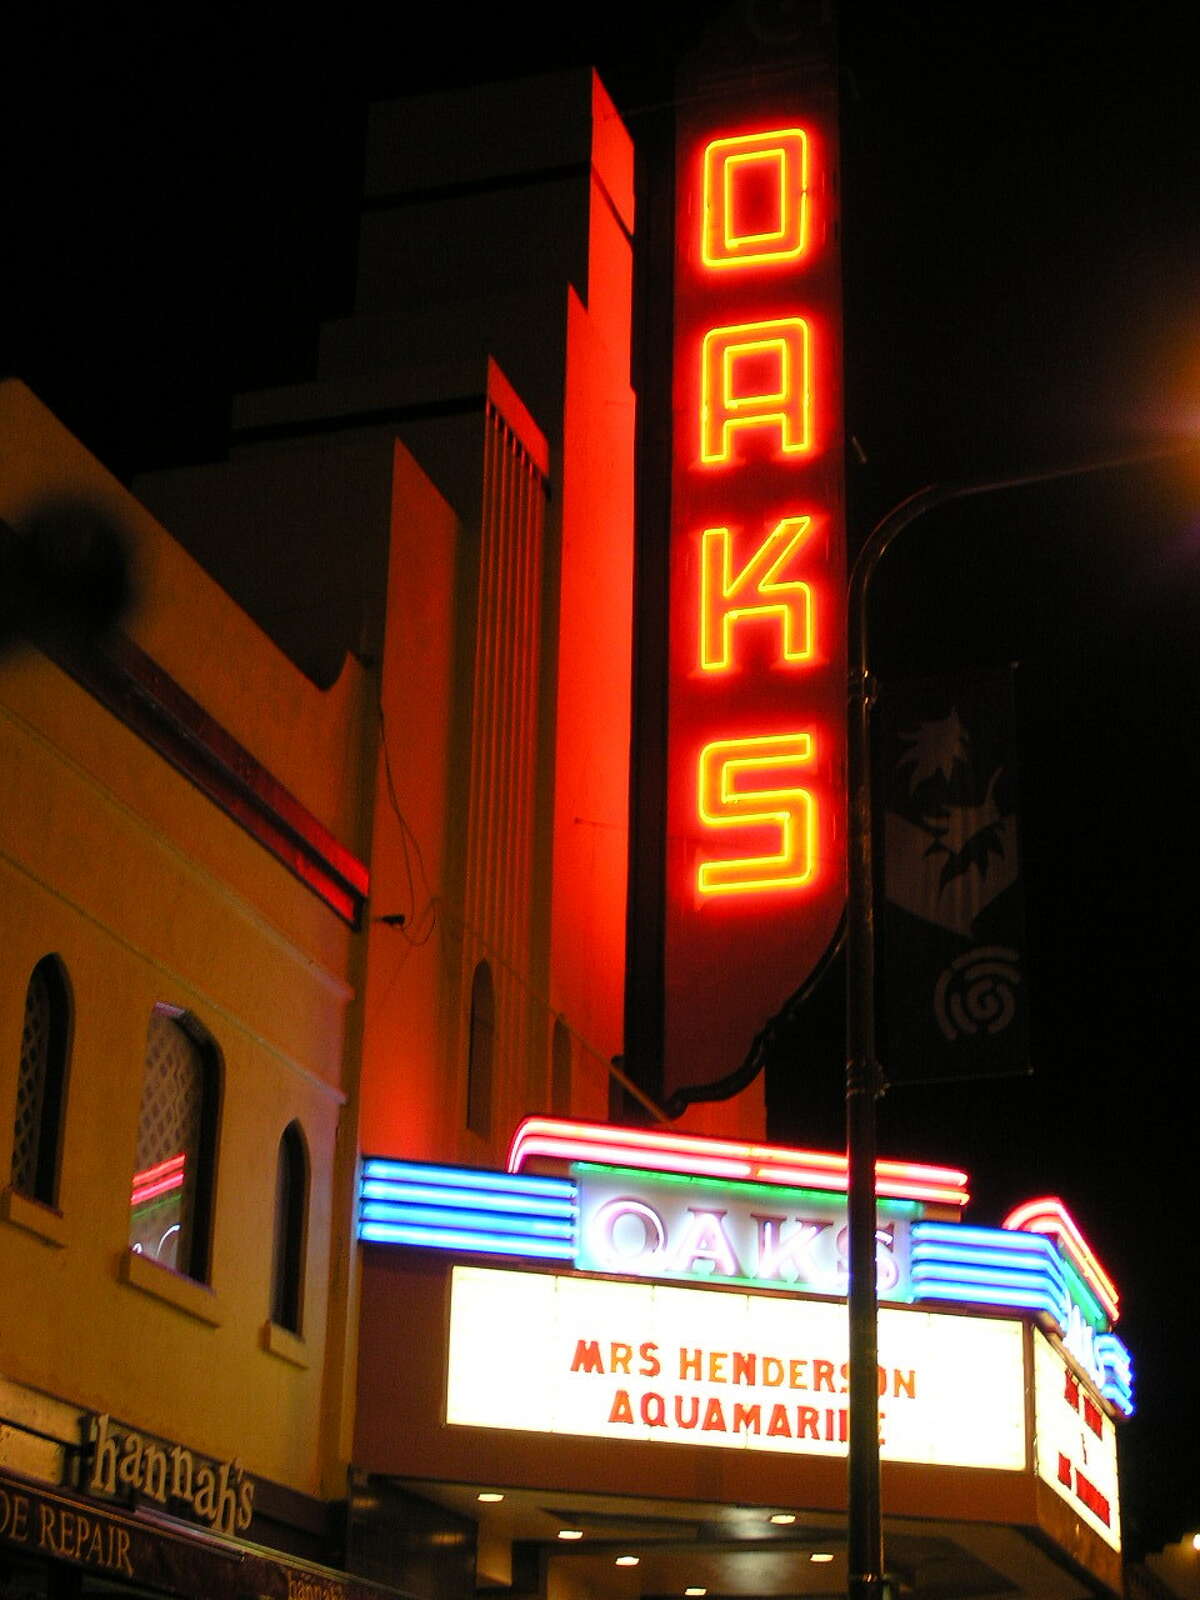 Touchstone Climbing, the company behind Ironworks and other gyms around California, plans to purchase the Oaks Theatre in Berkeley and turn it into a climbing facility.